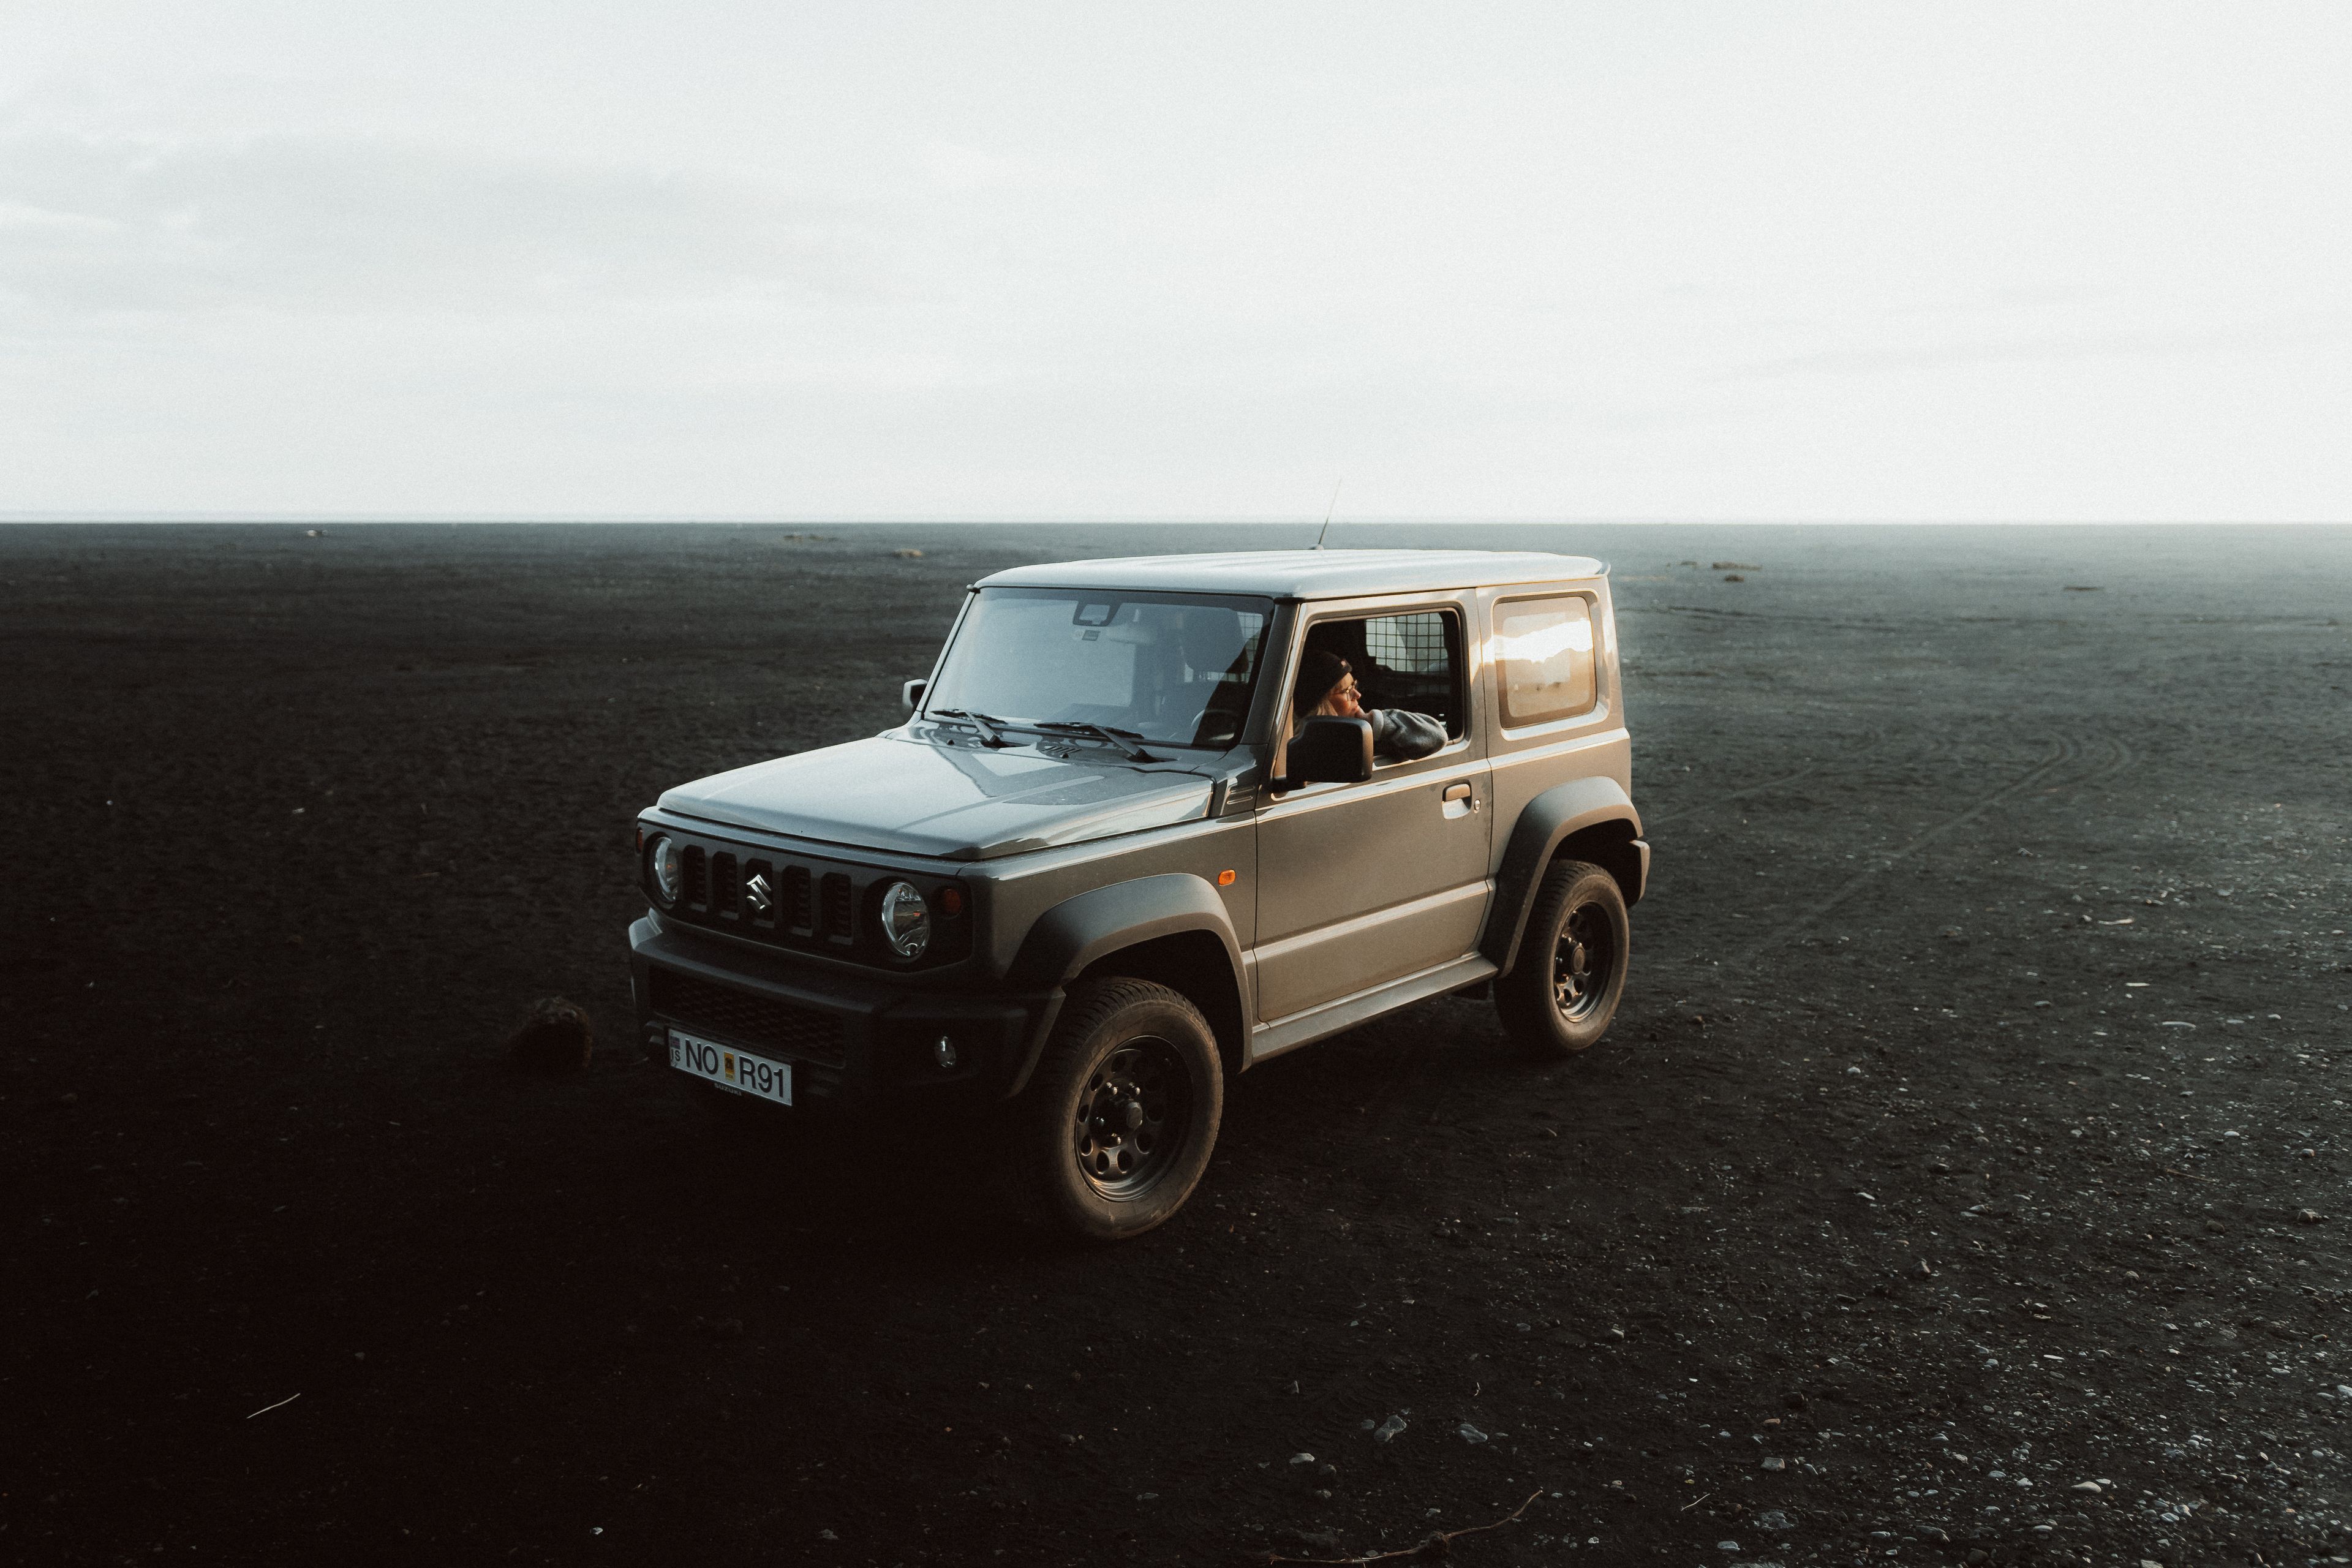 A Suzuki Jimny rental car parked against the stunning backdrop of Iceland's natural beauty.